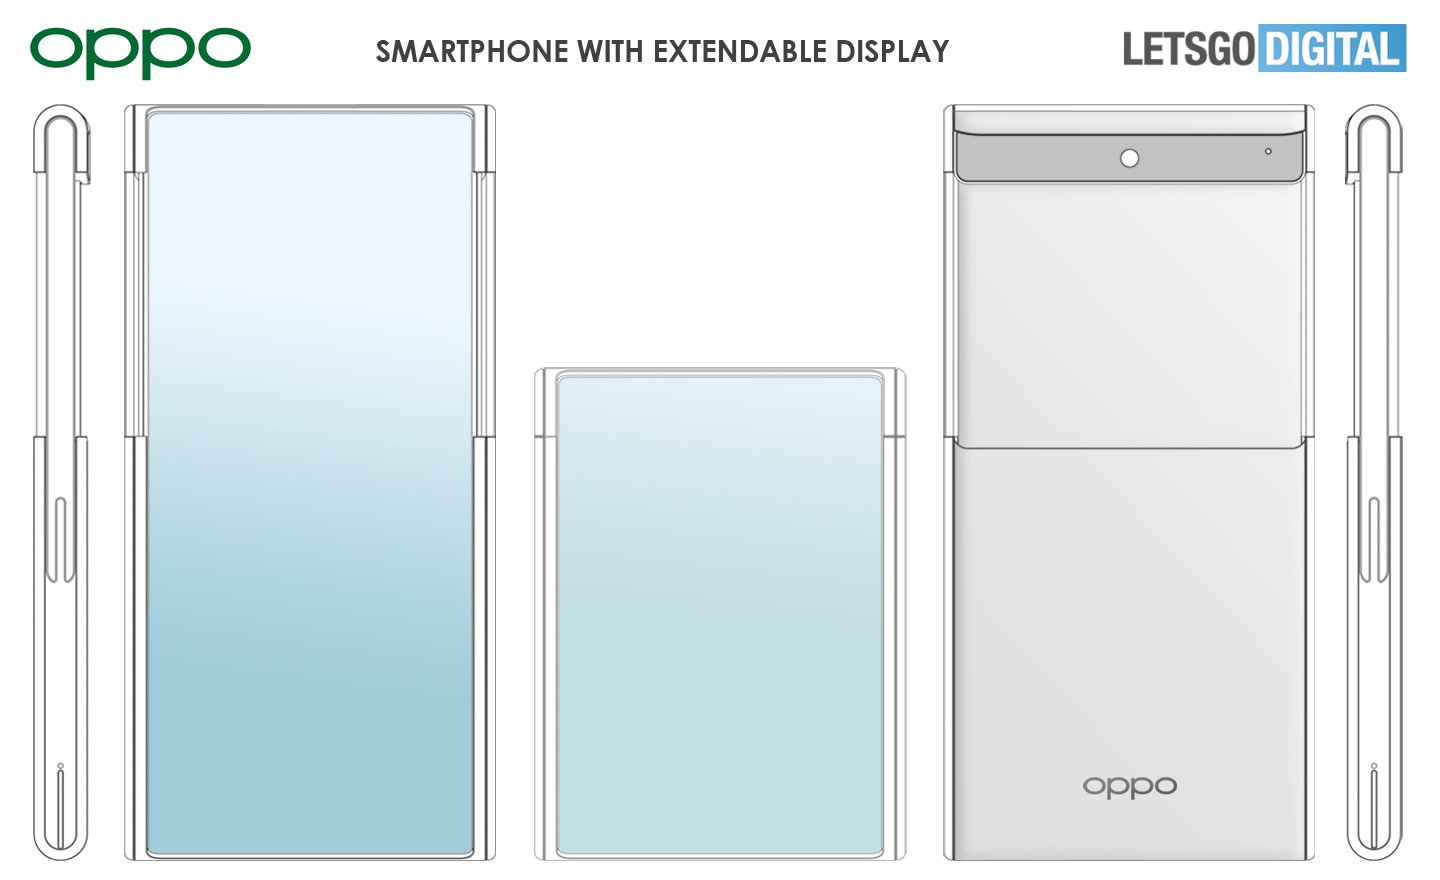 OPPO Extendable Display Smartphone Design Patent 02